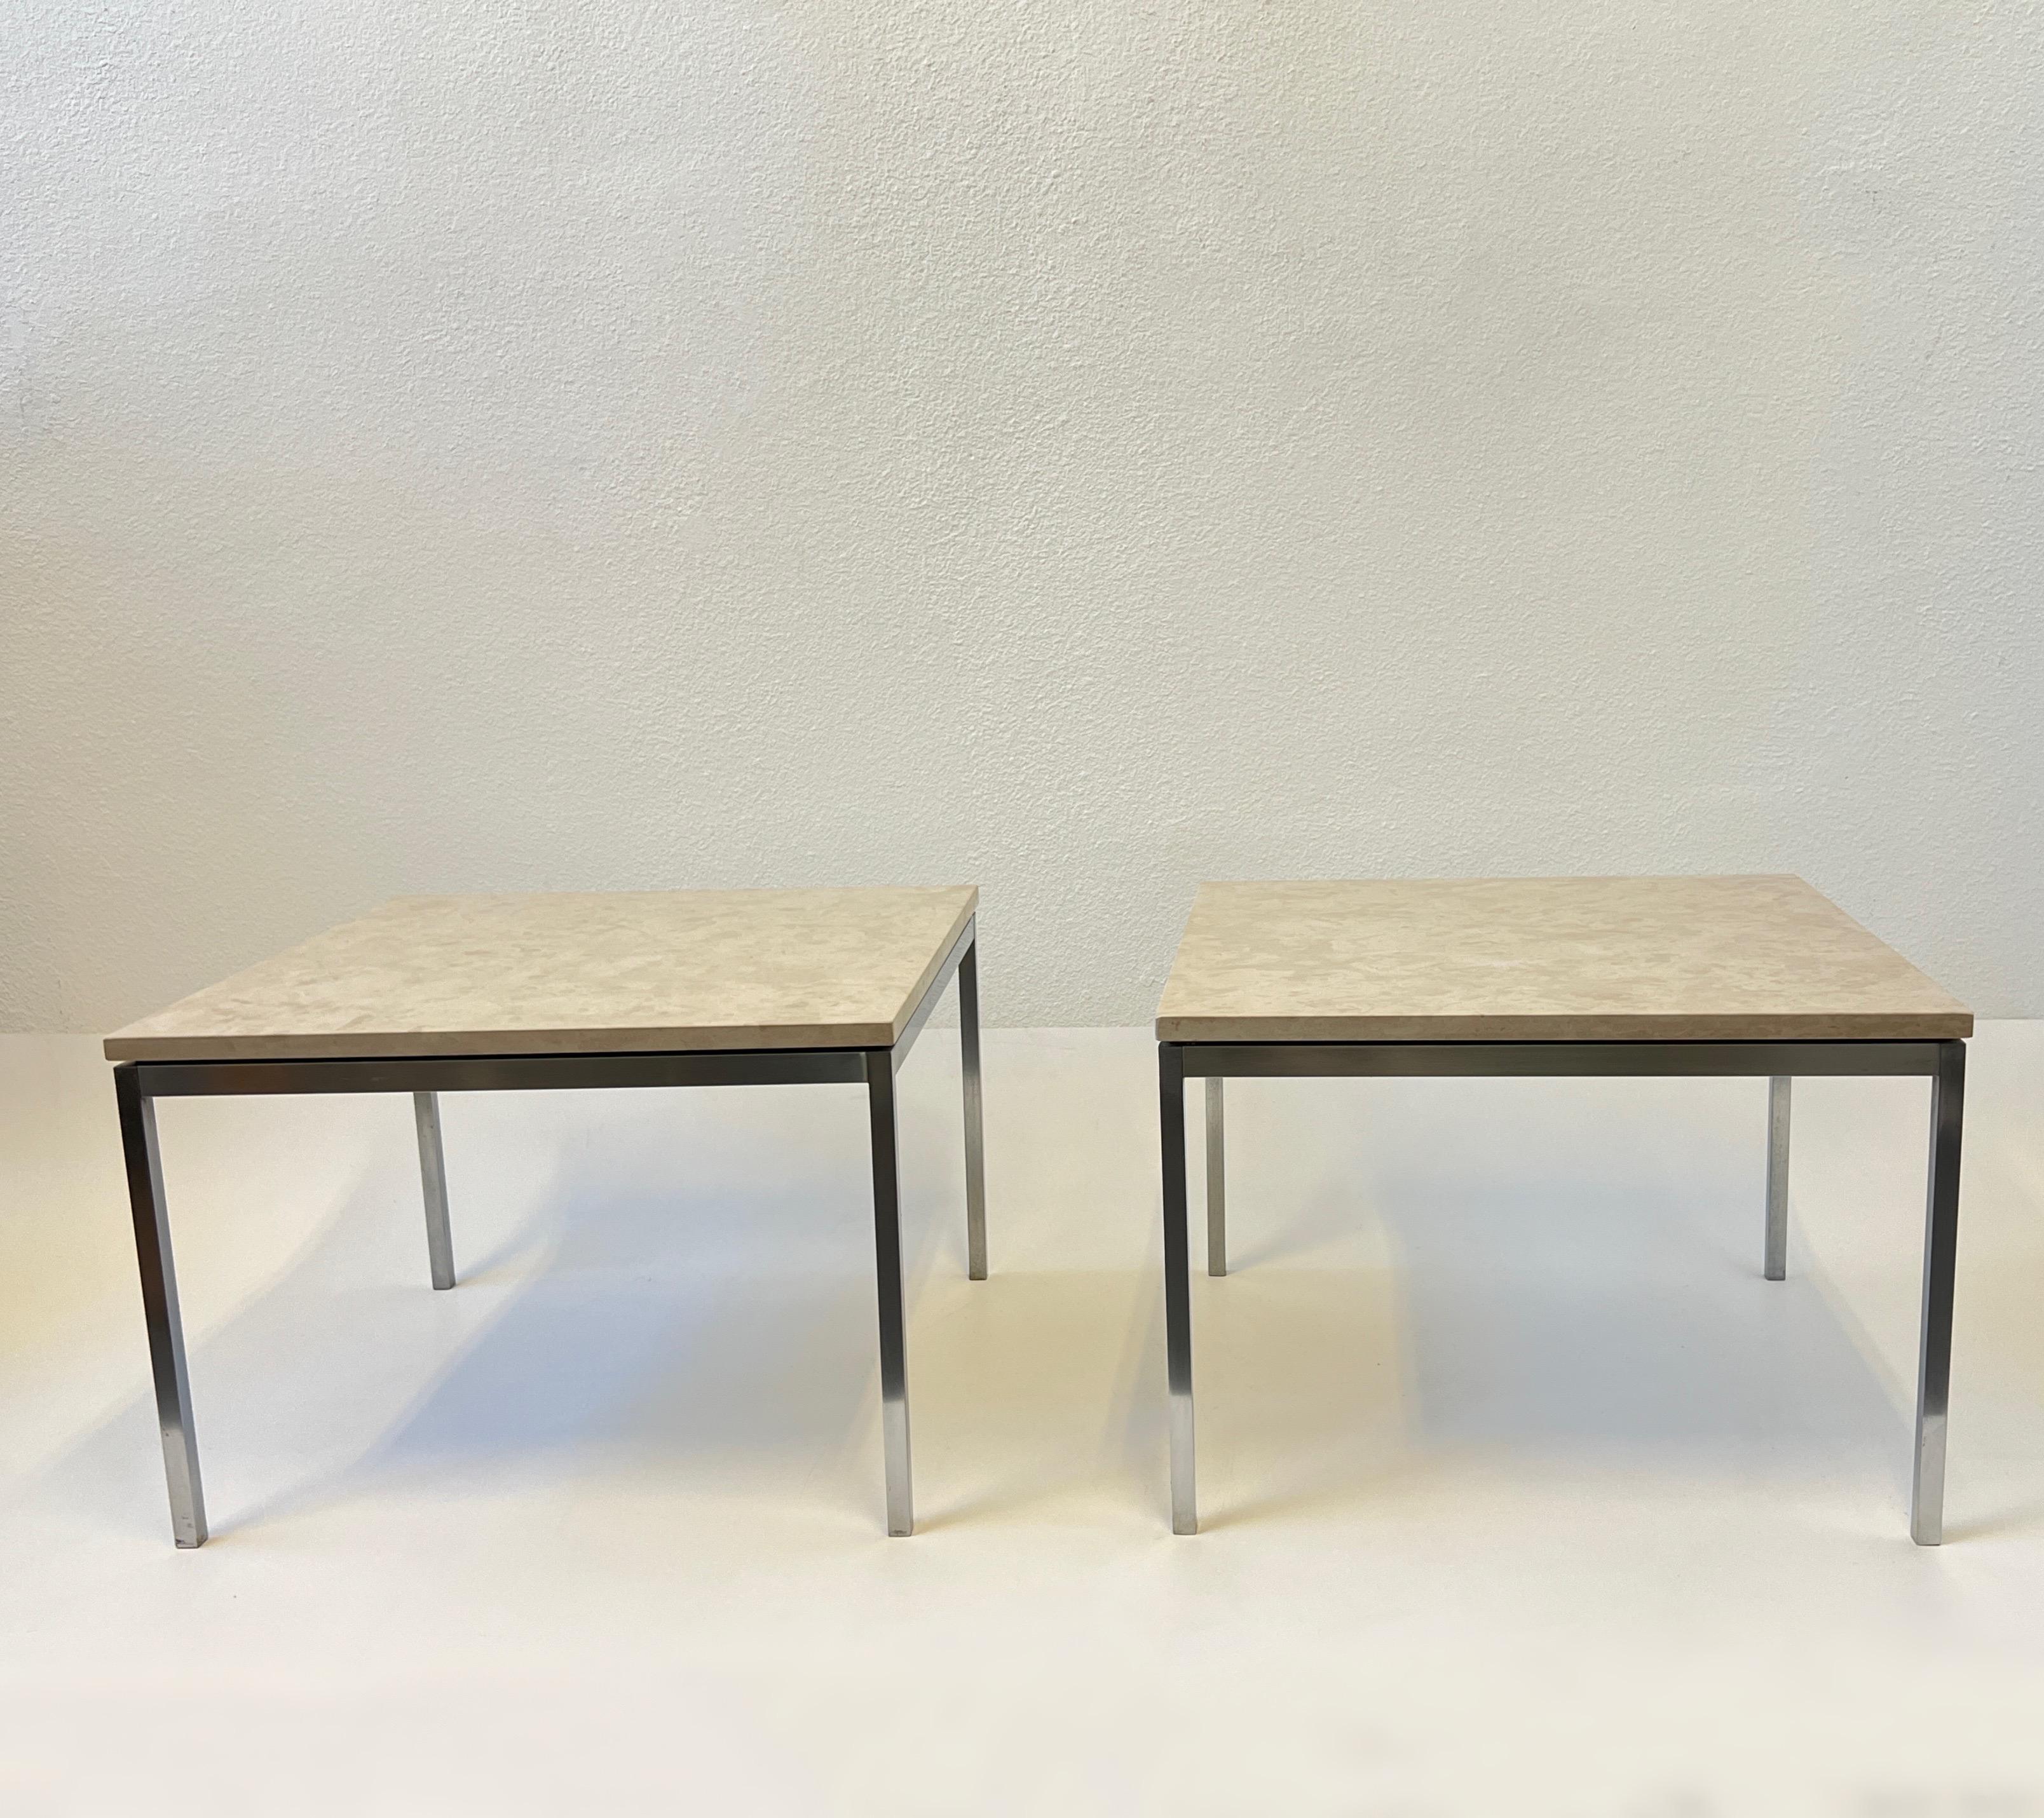 Iconic 1960’s pair of side tables designed by Florence Knoll for Knoll Associates. 
The frames are brushed stainless steel with off white granite tops. 
This came out of NBC Studios. 
In beautiful vintage condition with knoll labels.

Measurements: